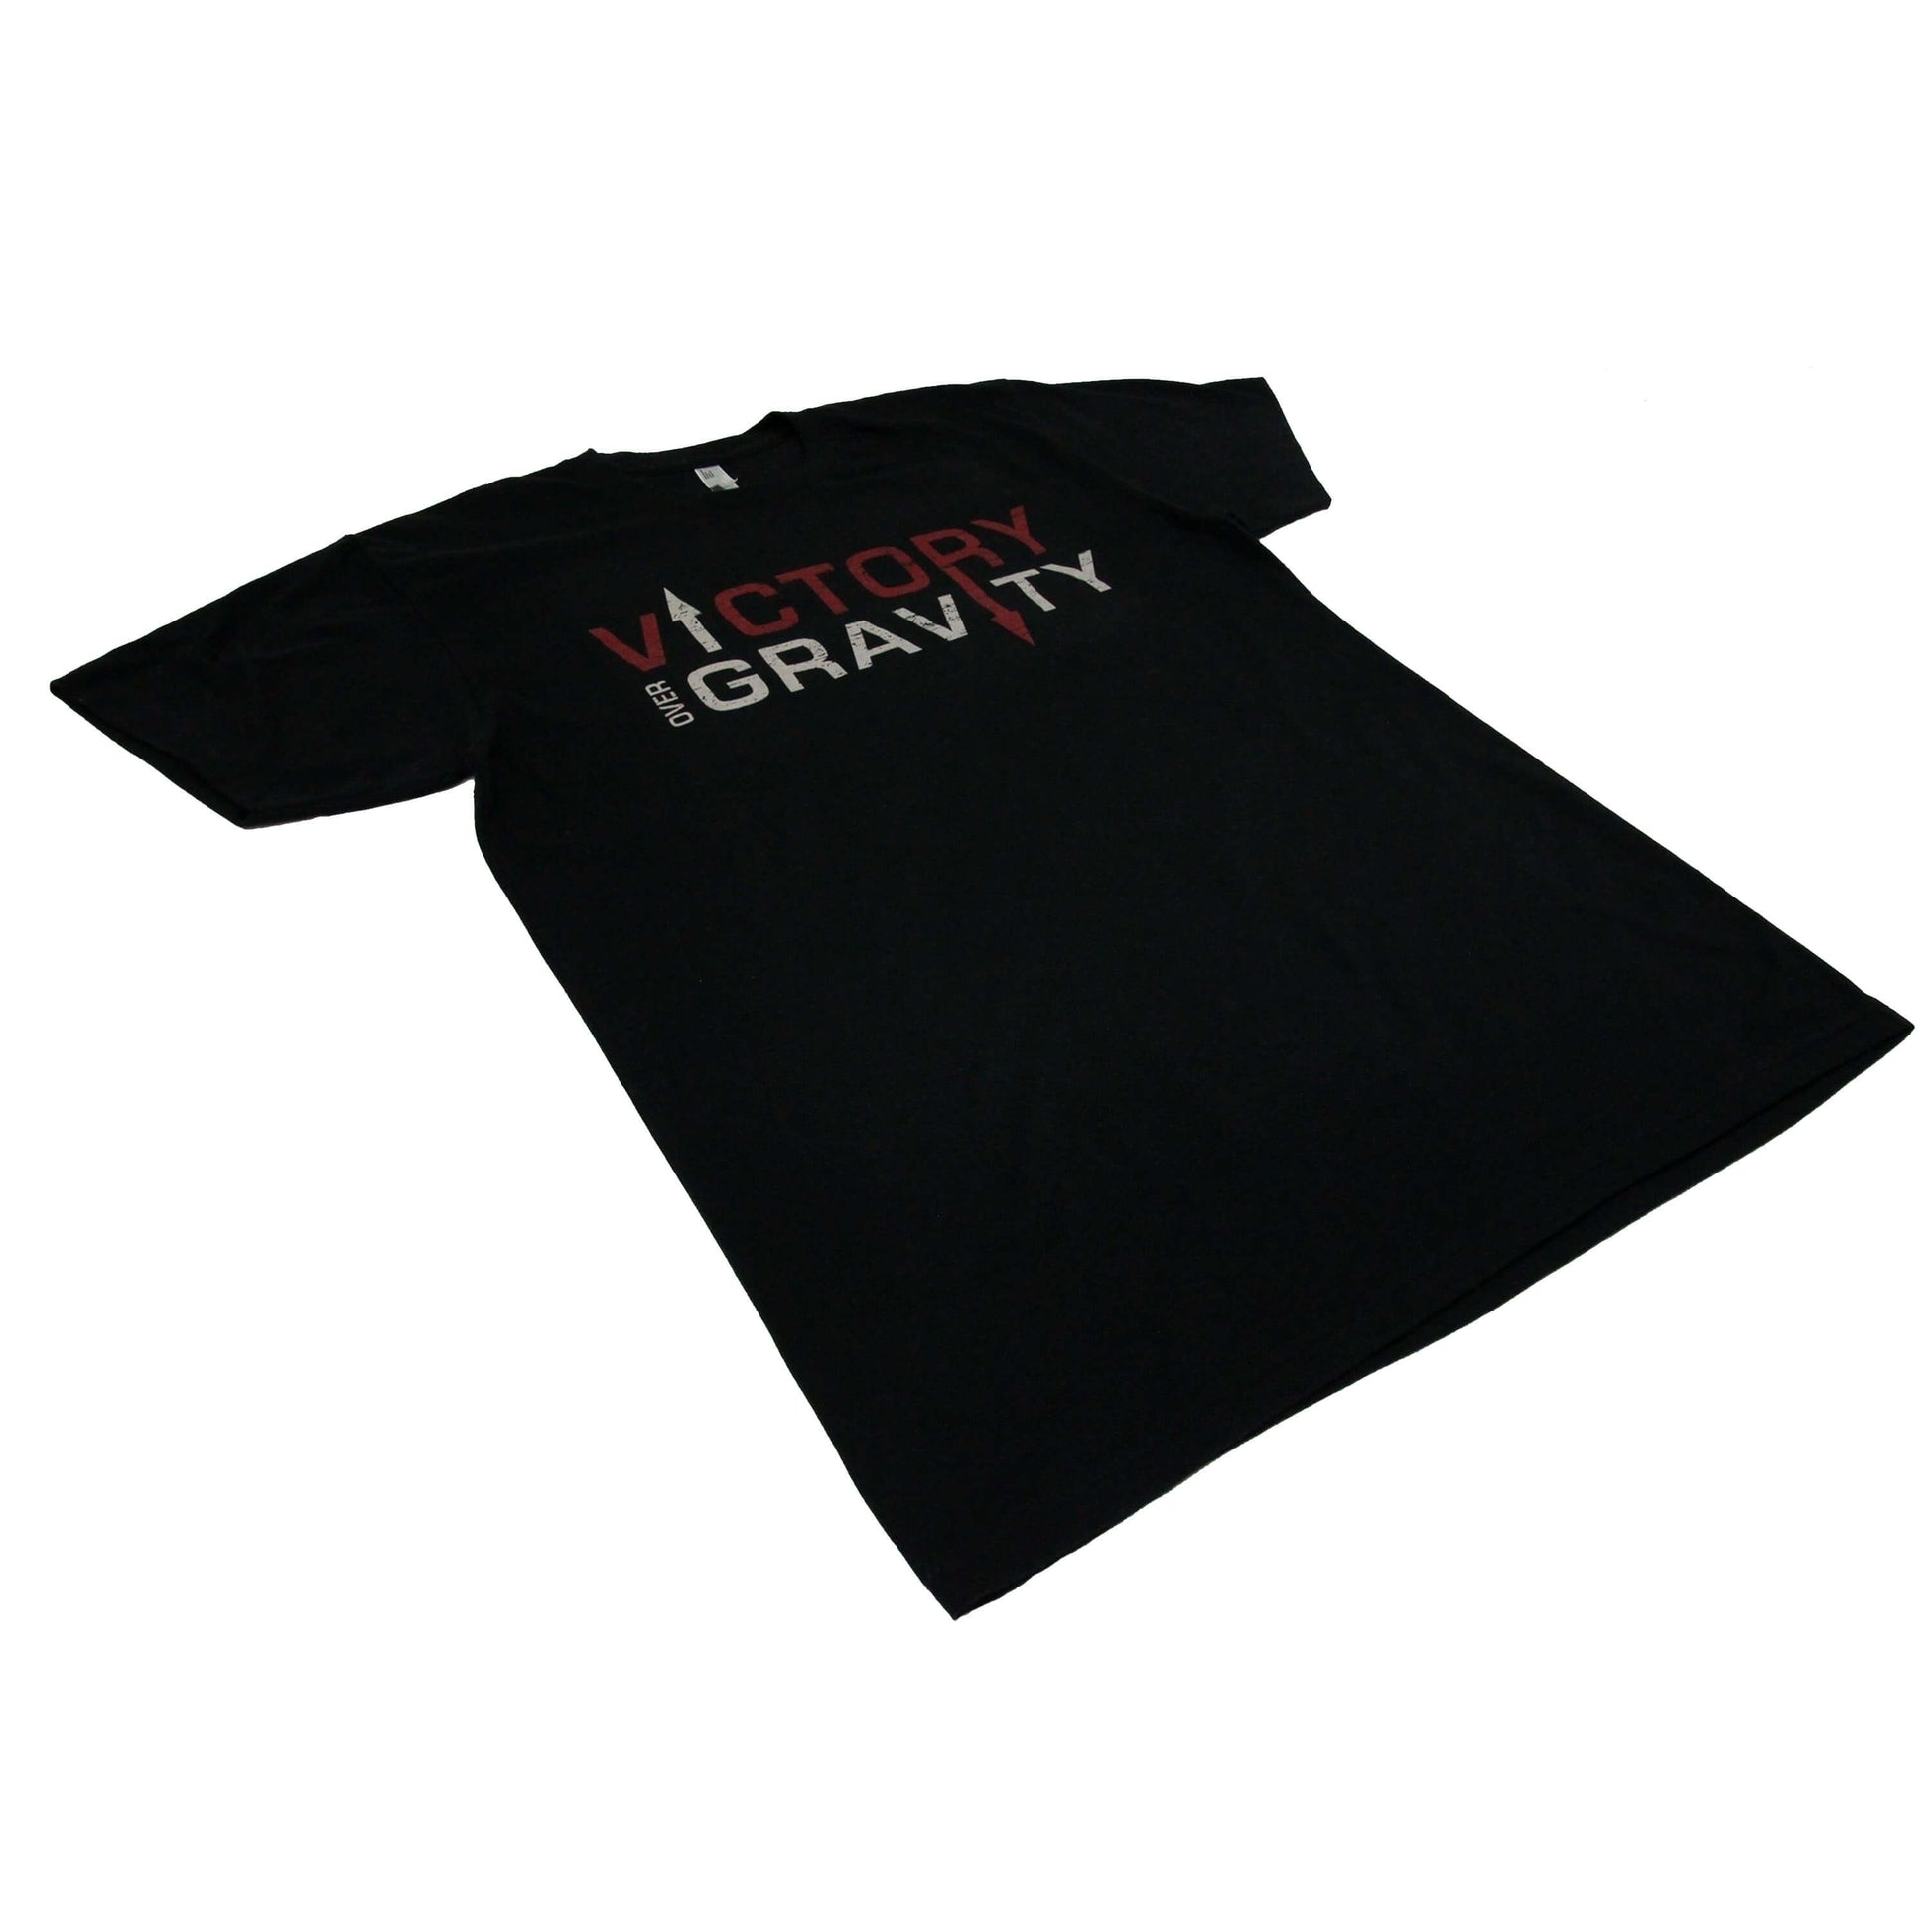 The 'Victory' powerlifting t-shirt | Iron Strong Apparel